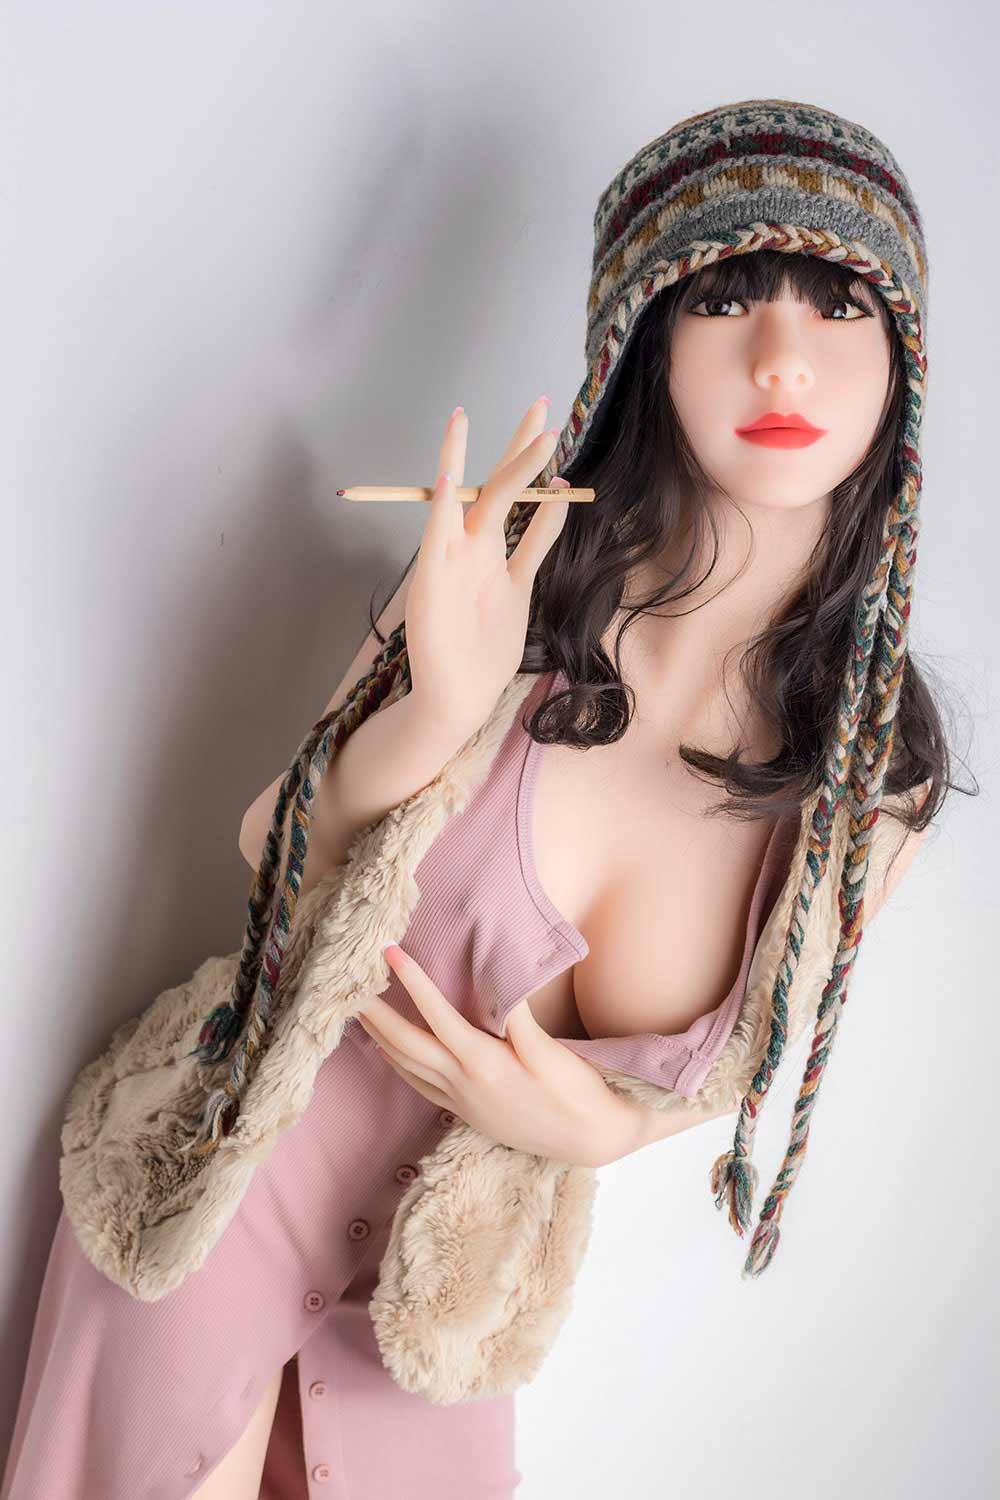 Sex doll with hat